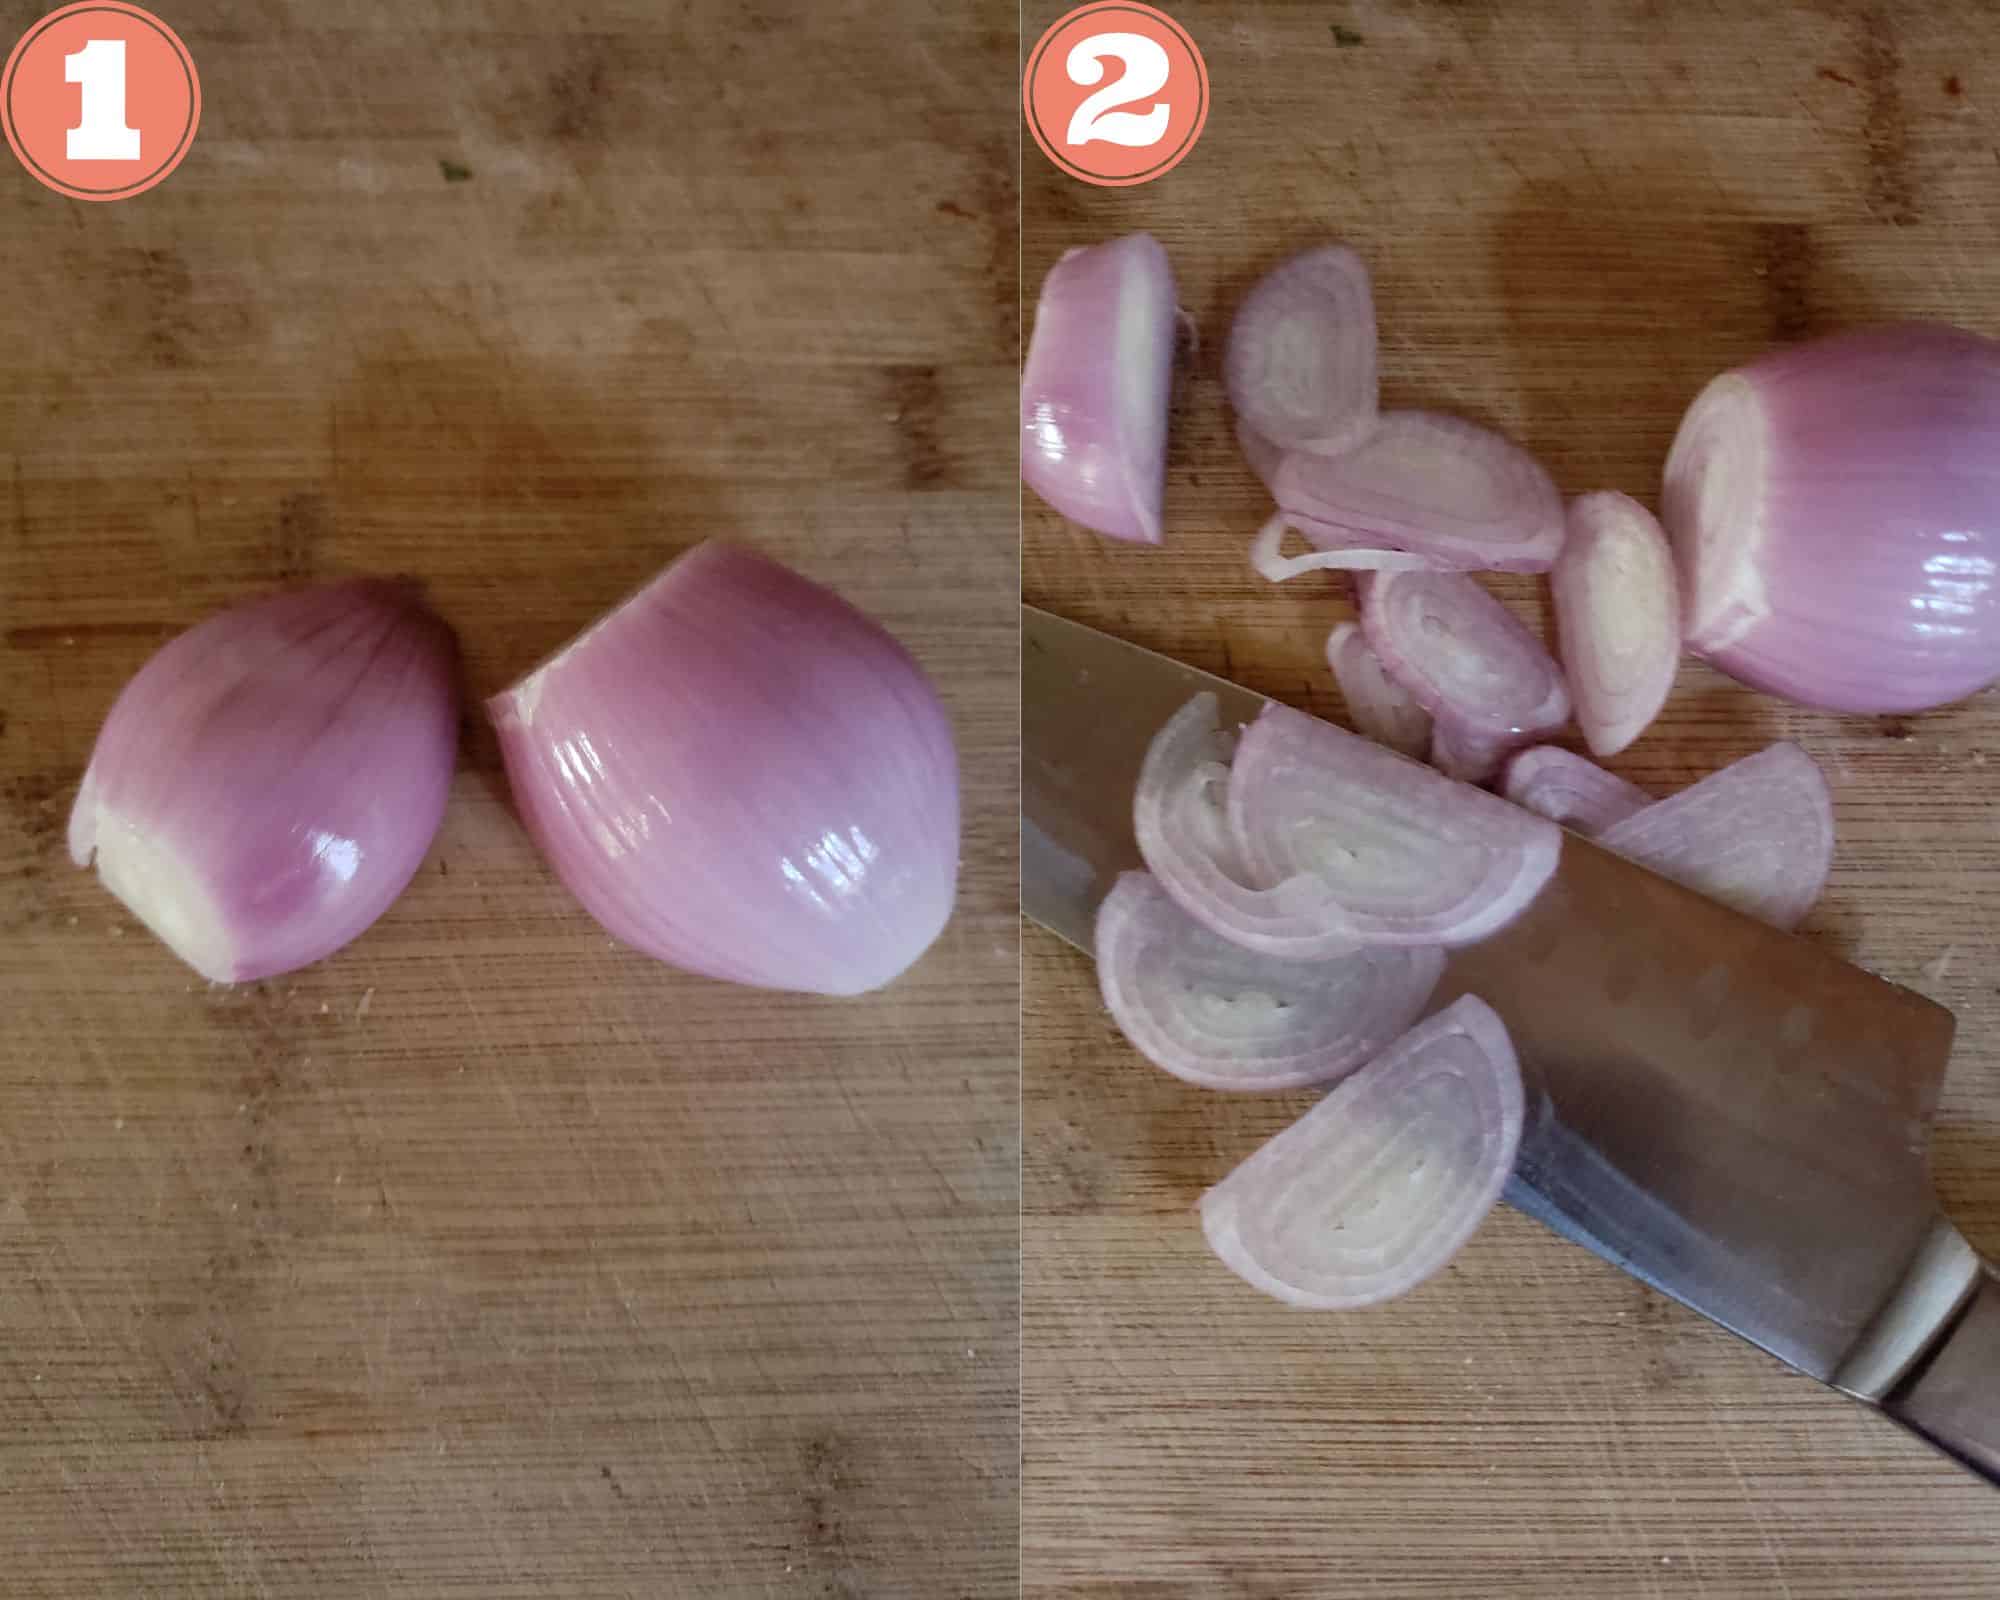 Photos that show how to slice a shallot.